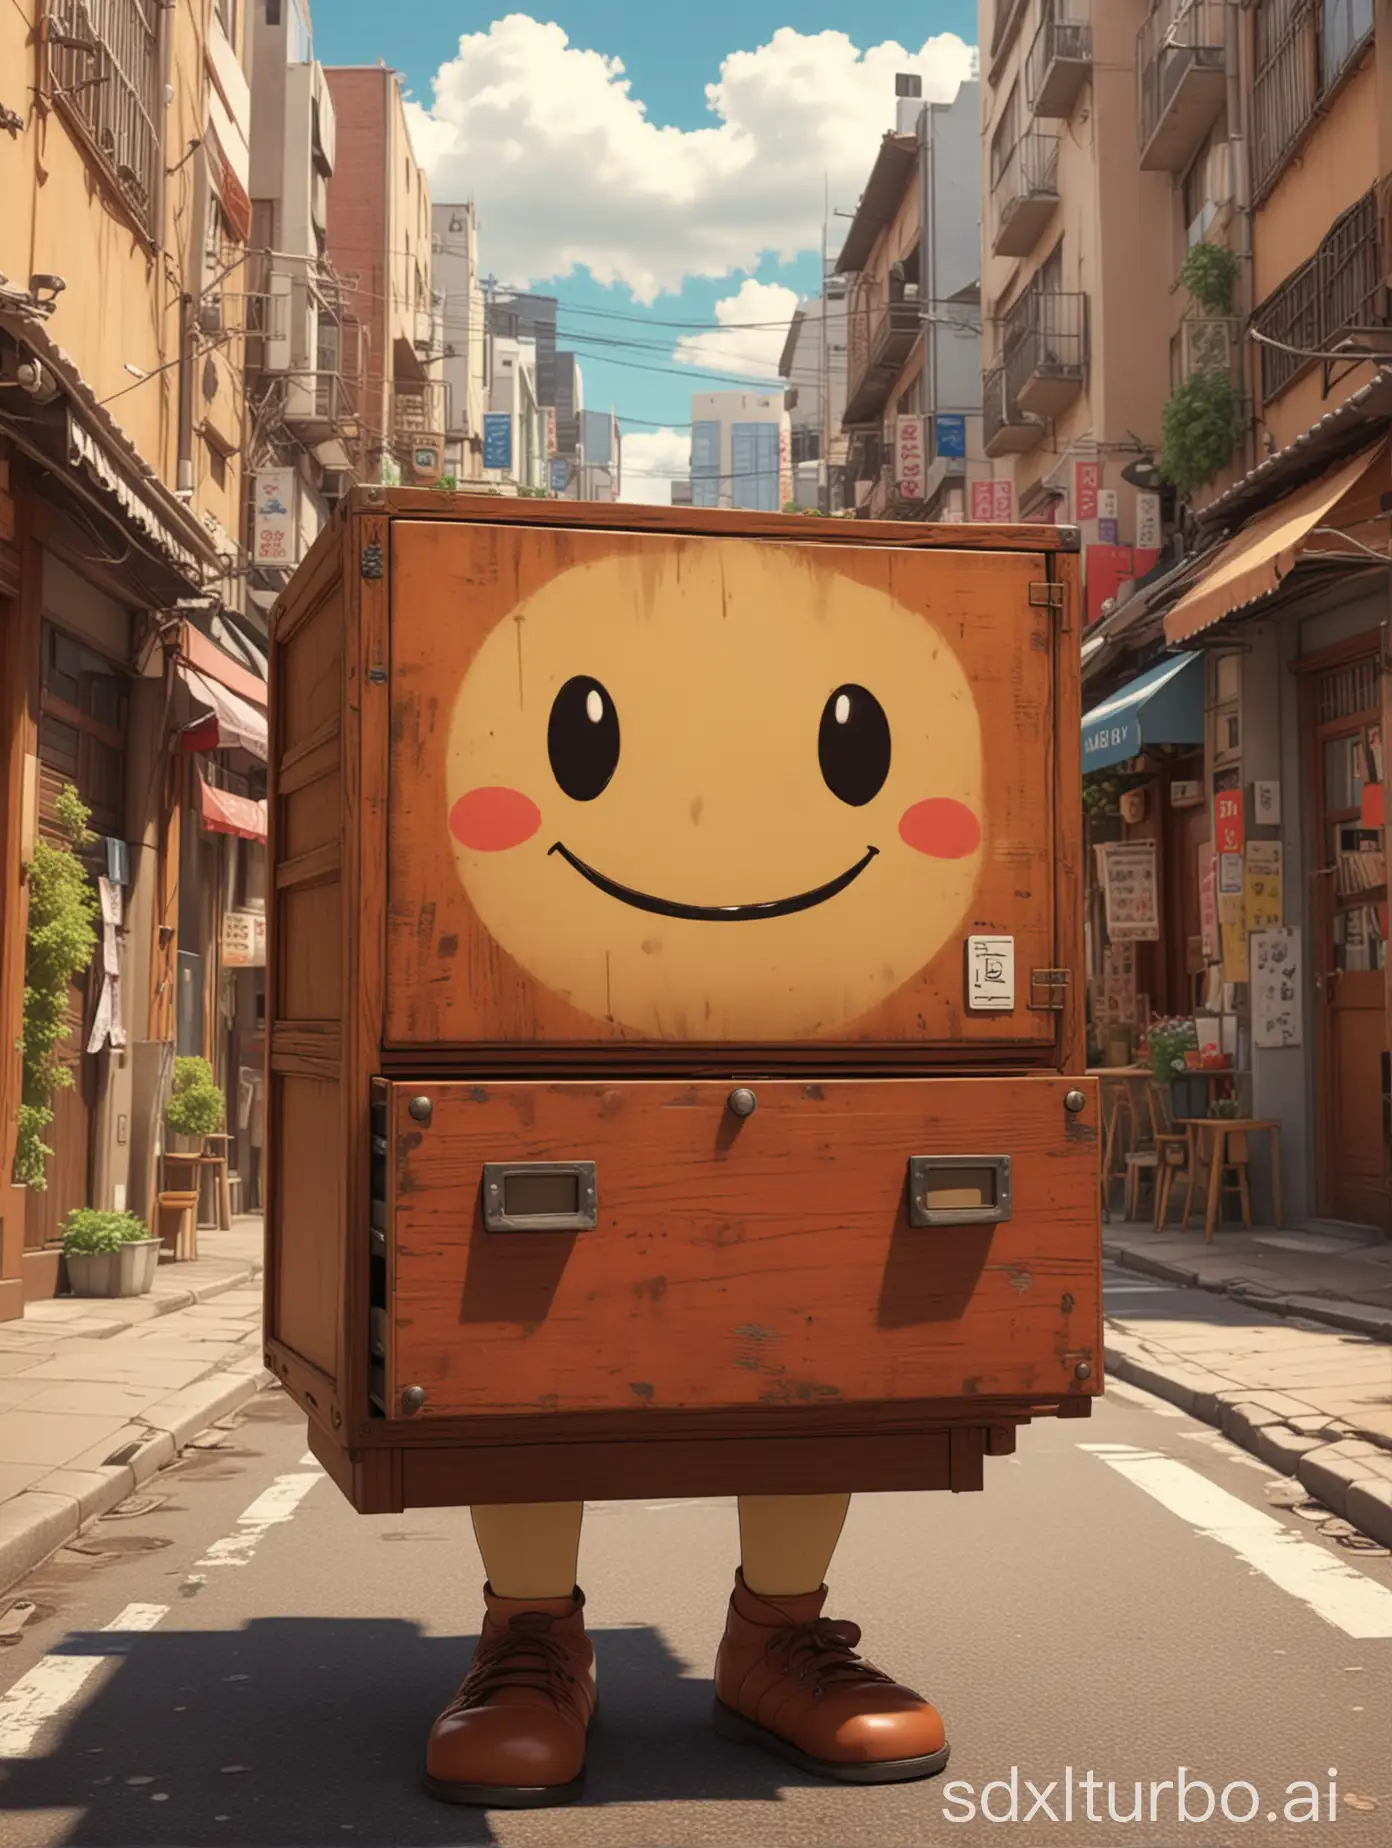 masterpiece, 4K, in a manga style of MiyazakiHayao,a smile face with hands and legs in a shape of a brown four-layer drawer,it merrily prancing along a lively and colorful street, cartoonish, bustling city backdrop, vibrant hues, playful and cheery atmosphere